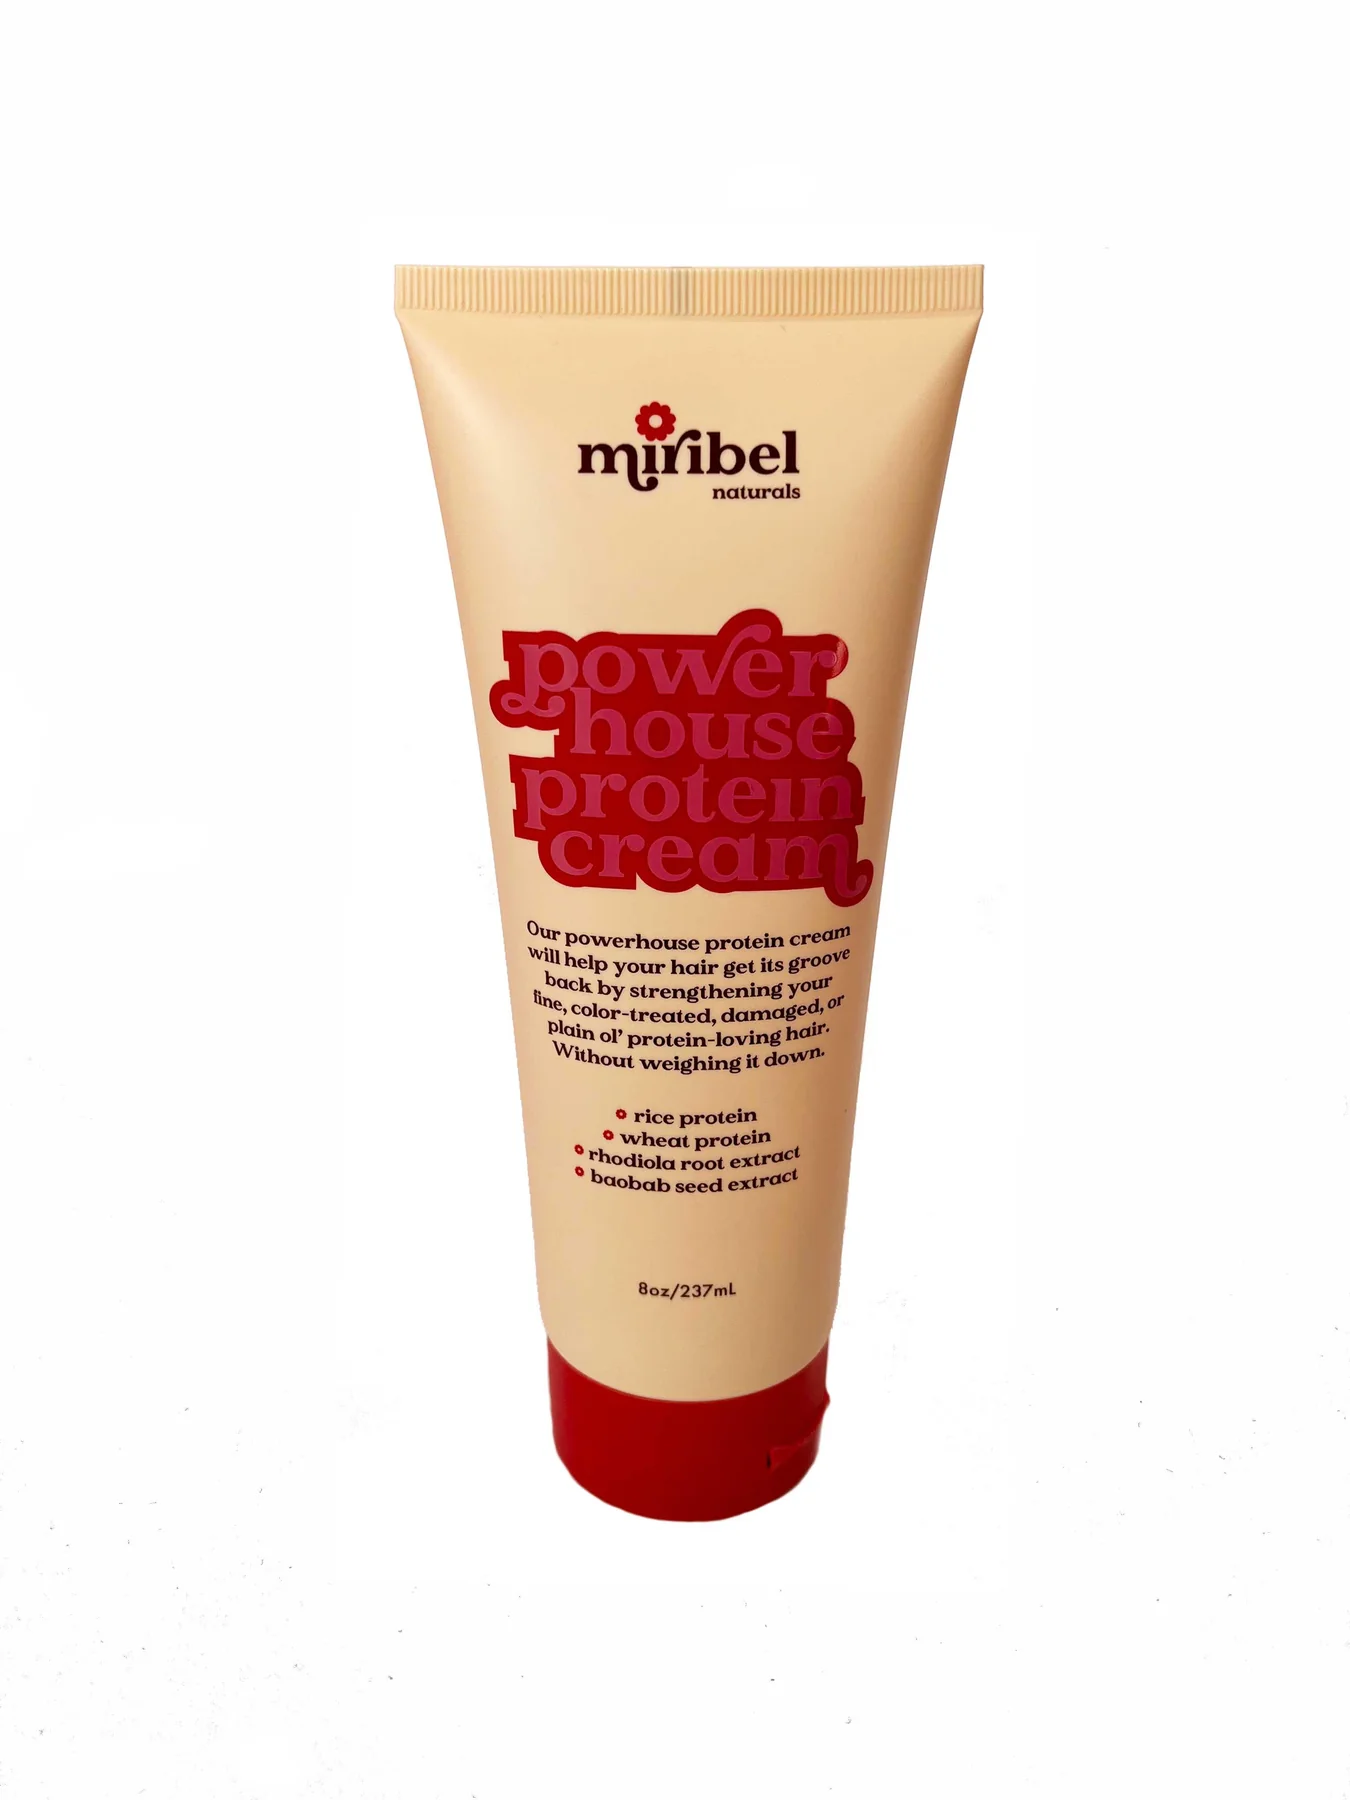 Product image of Miribel Naturals Powerhouse Protein Cream, a product that's used in a wavy hair routine